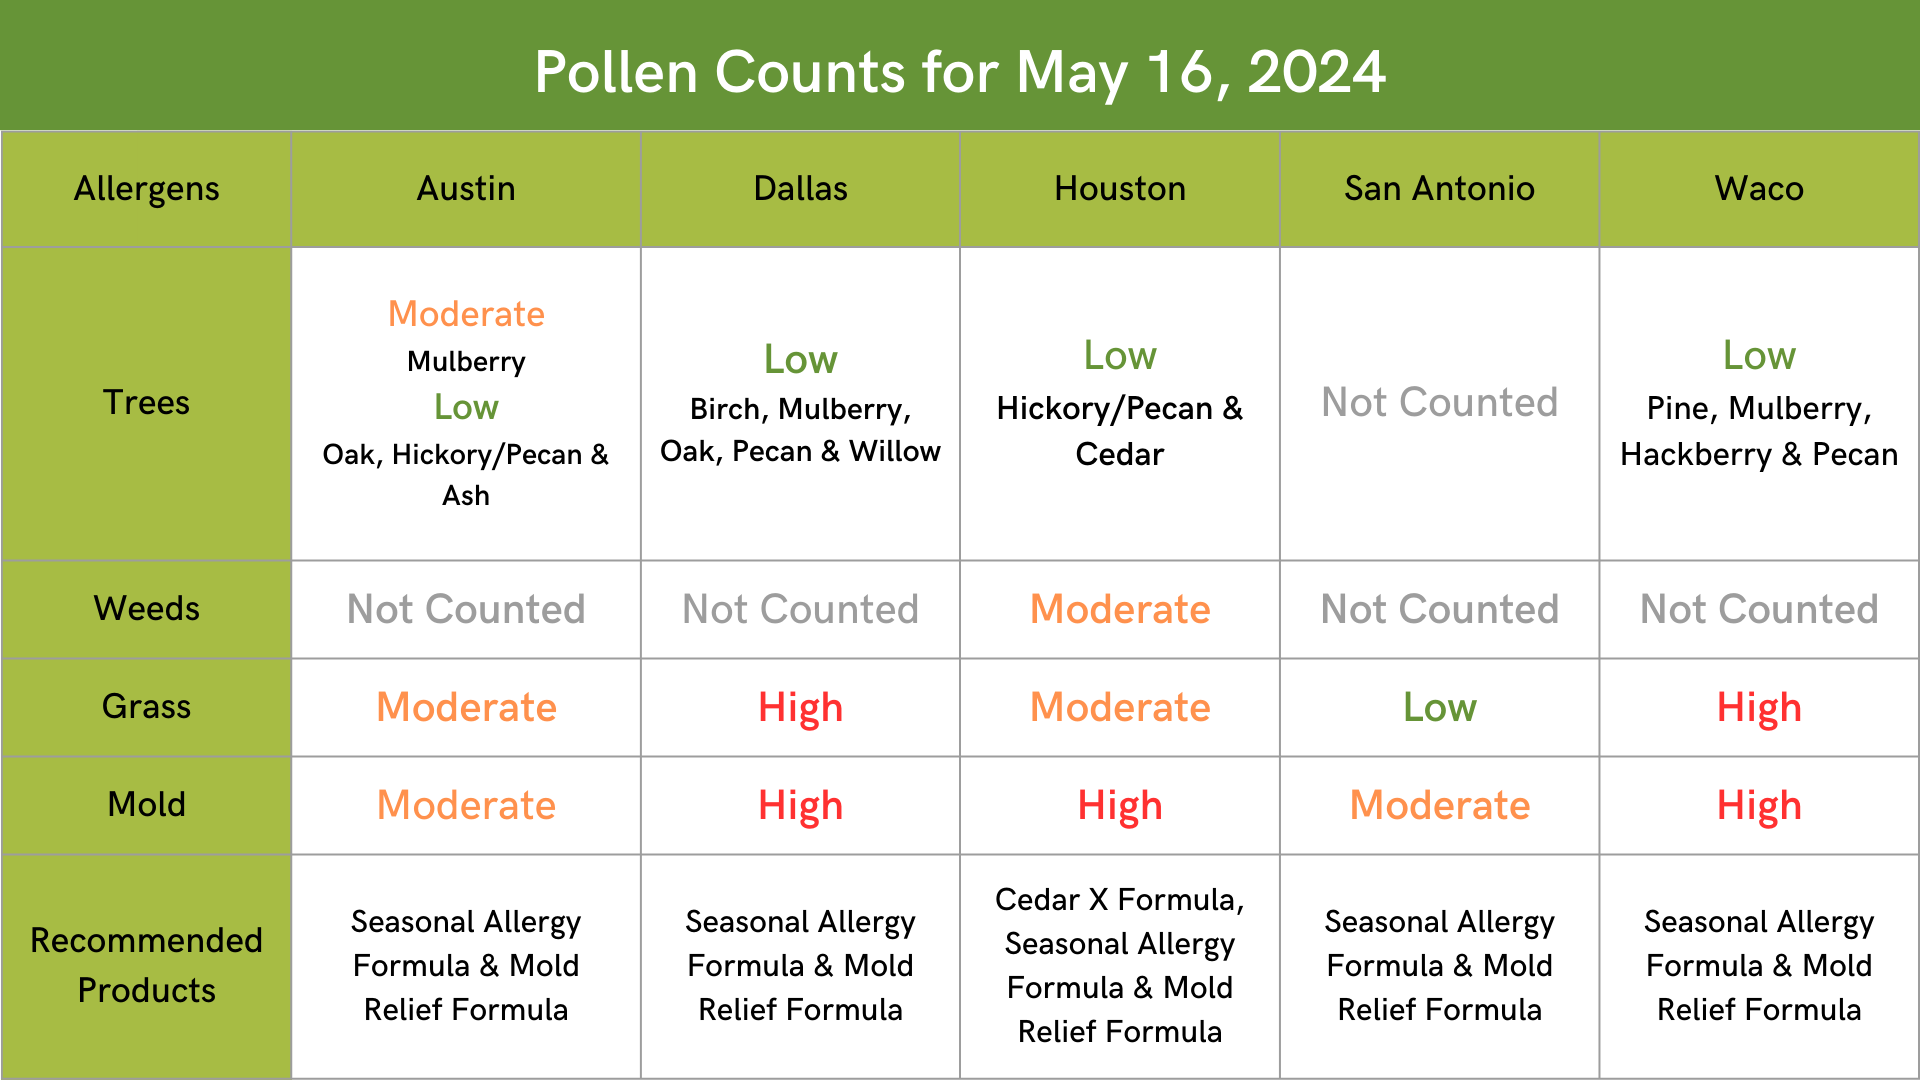 Texas Allergy Pollen Counts of Trees, Weeds, Grass and Mold in Austin, Dallas, Houston, San Antonio and Waco on May 16, 2024